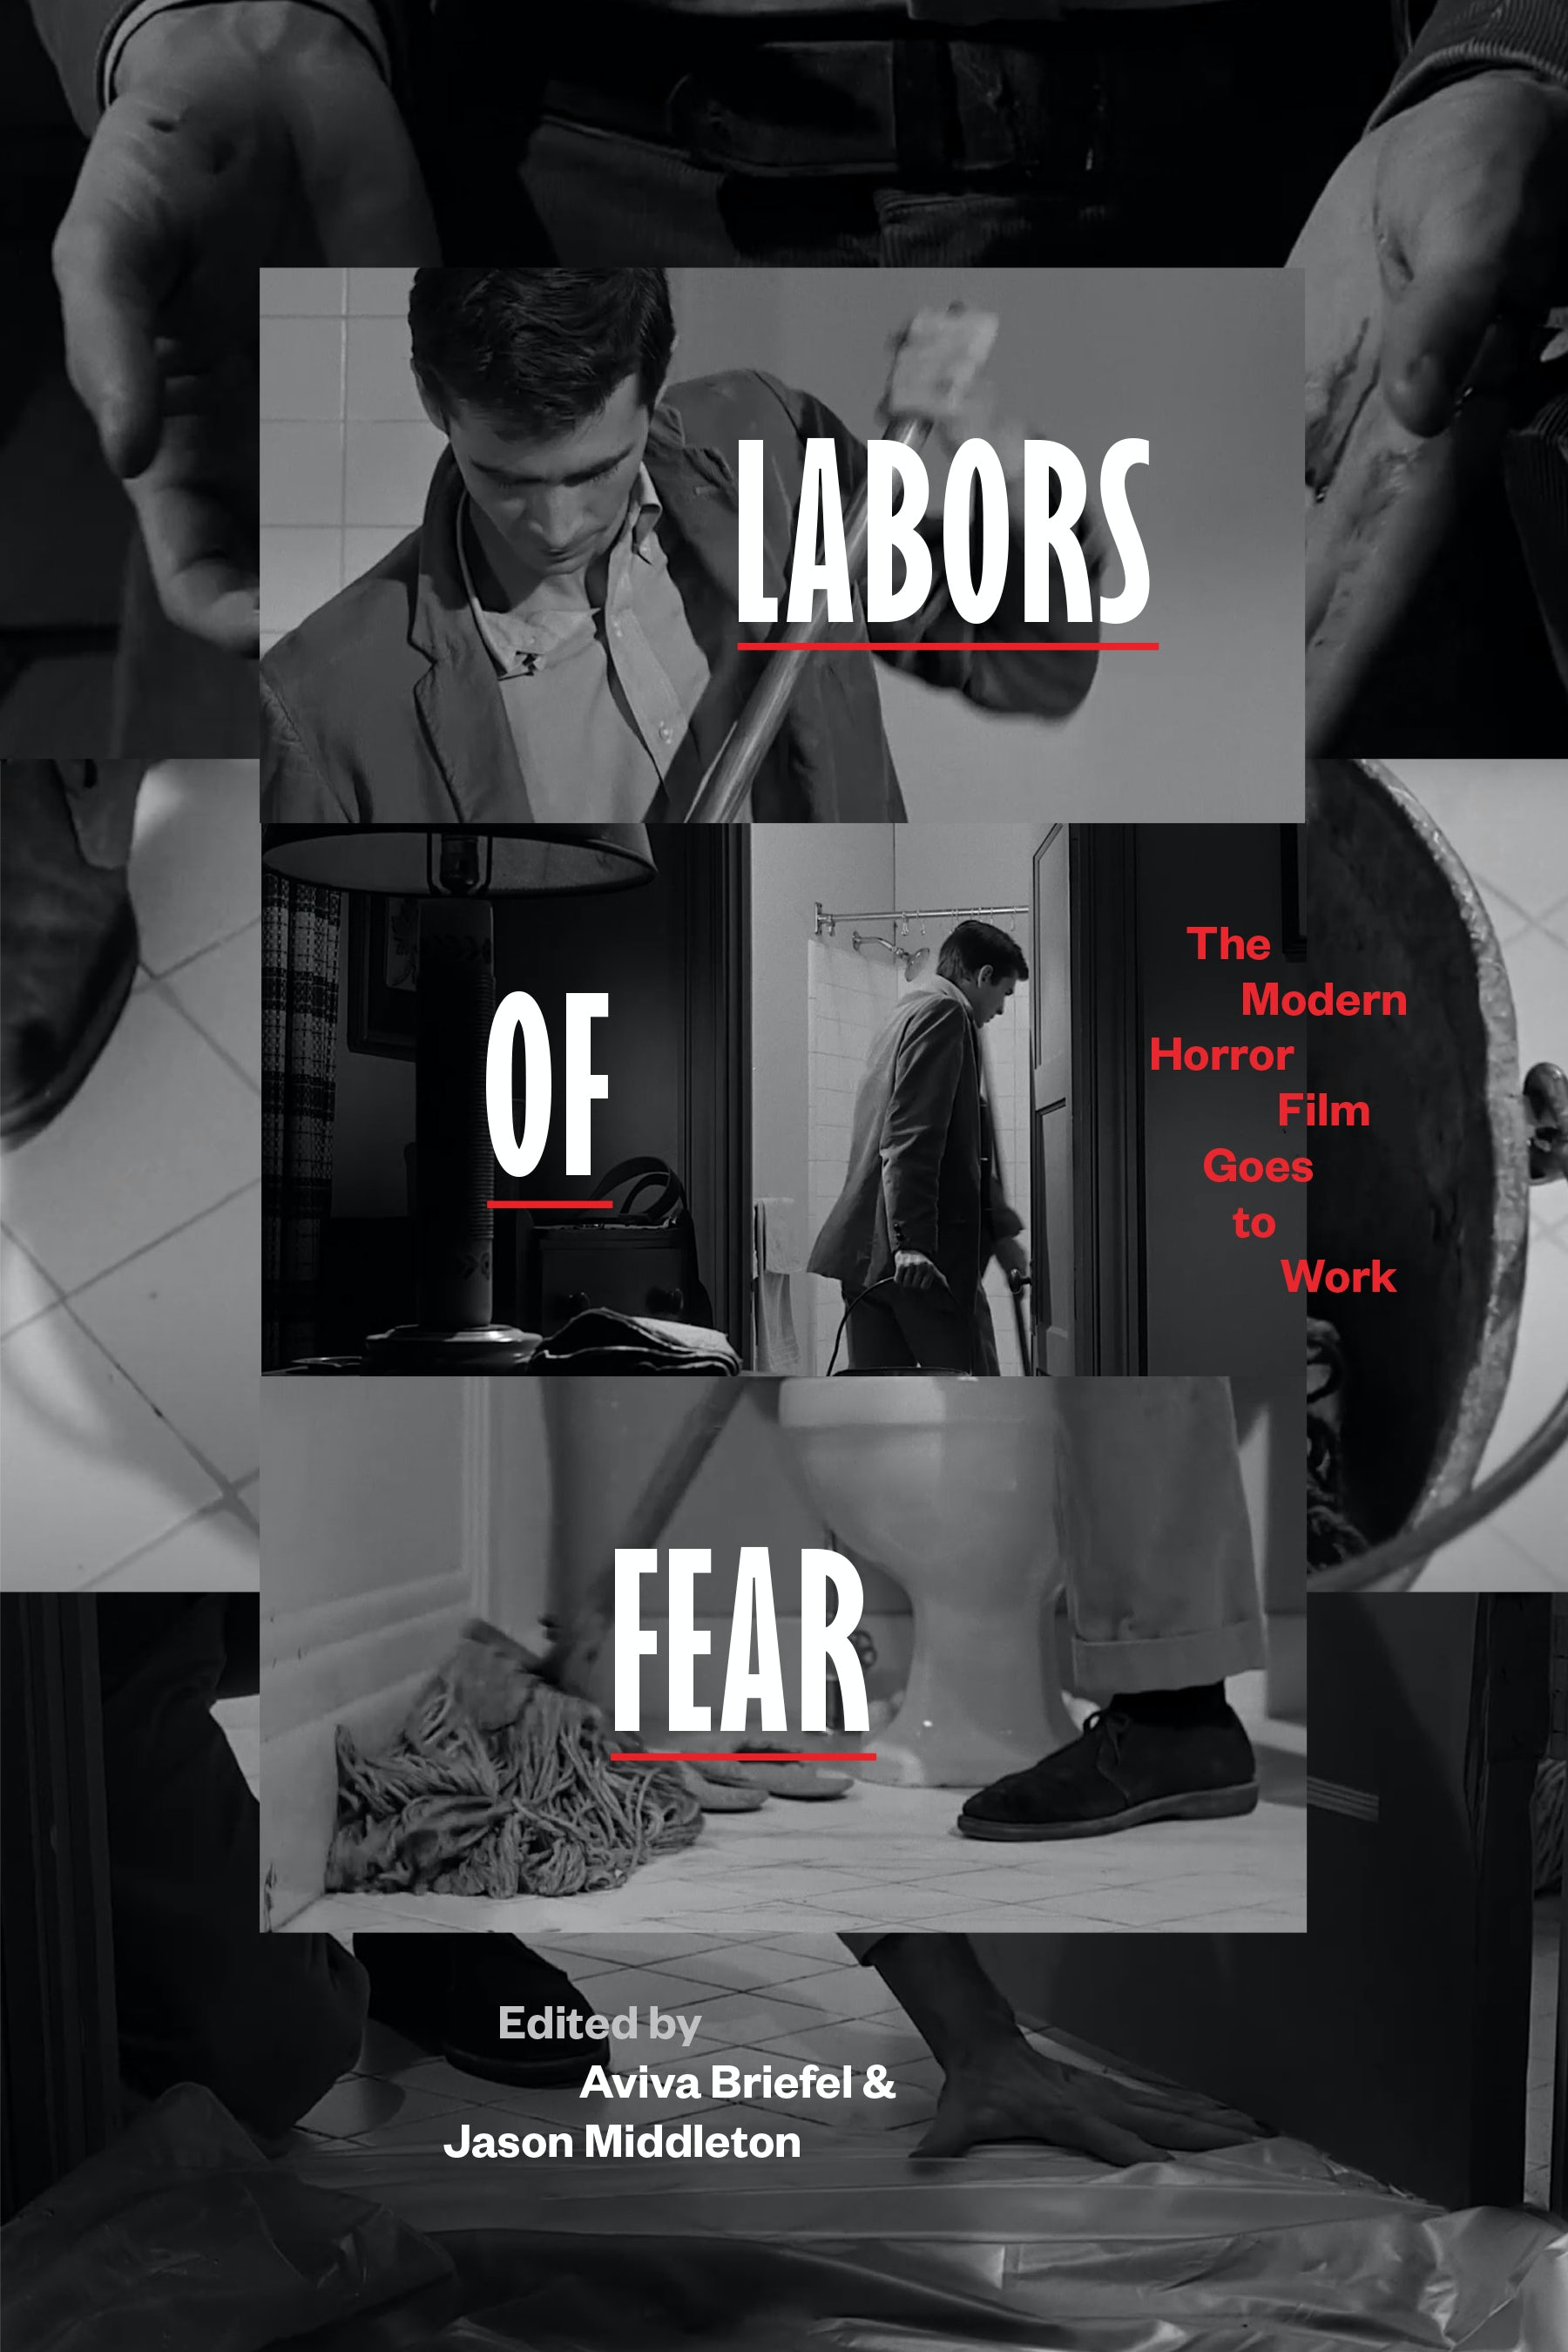 Labors of Fear